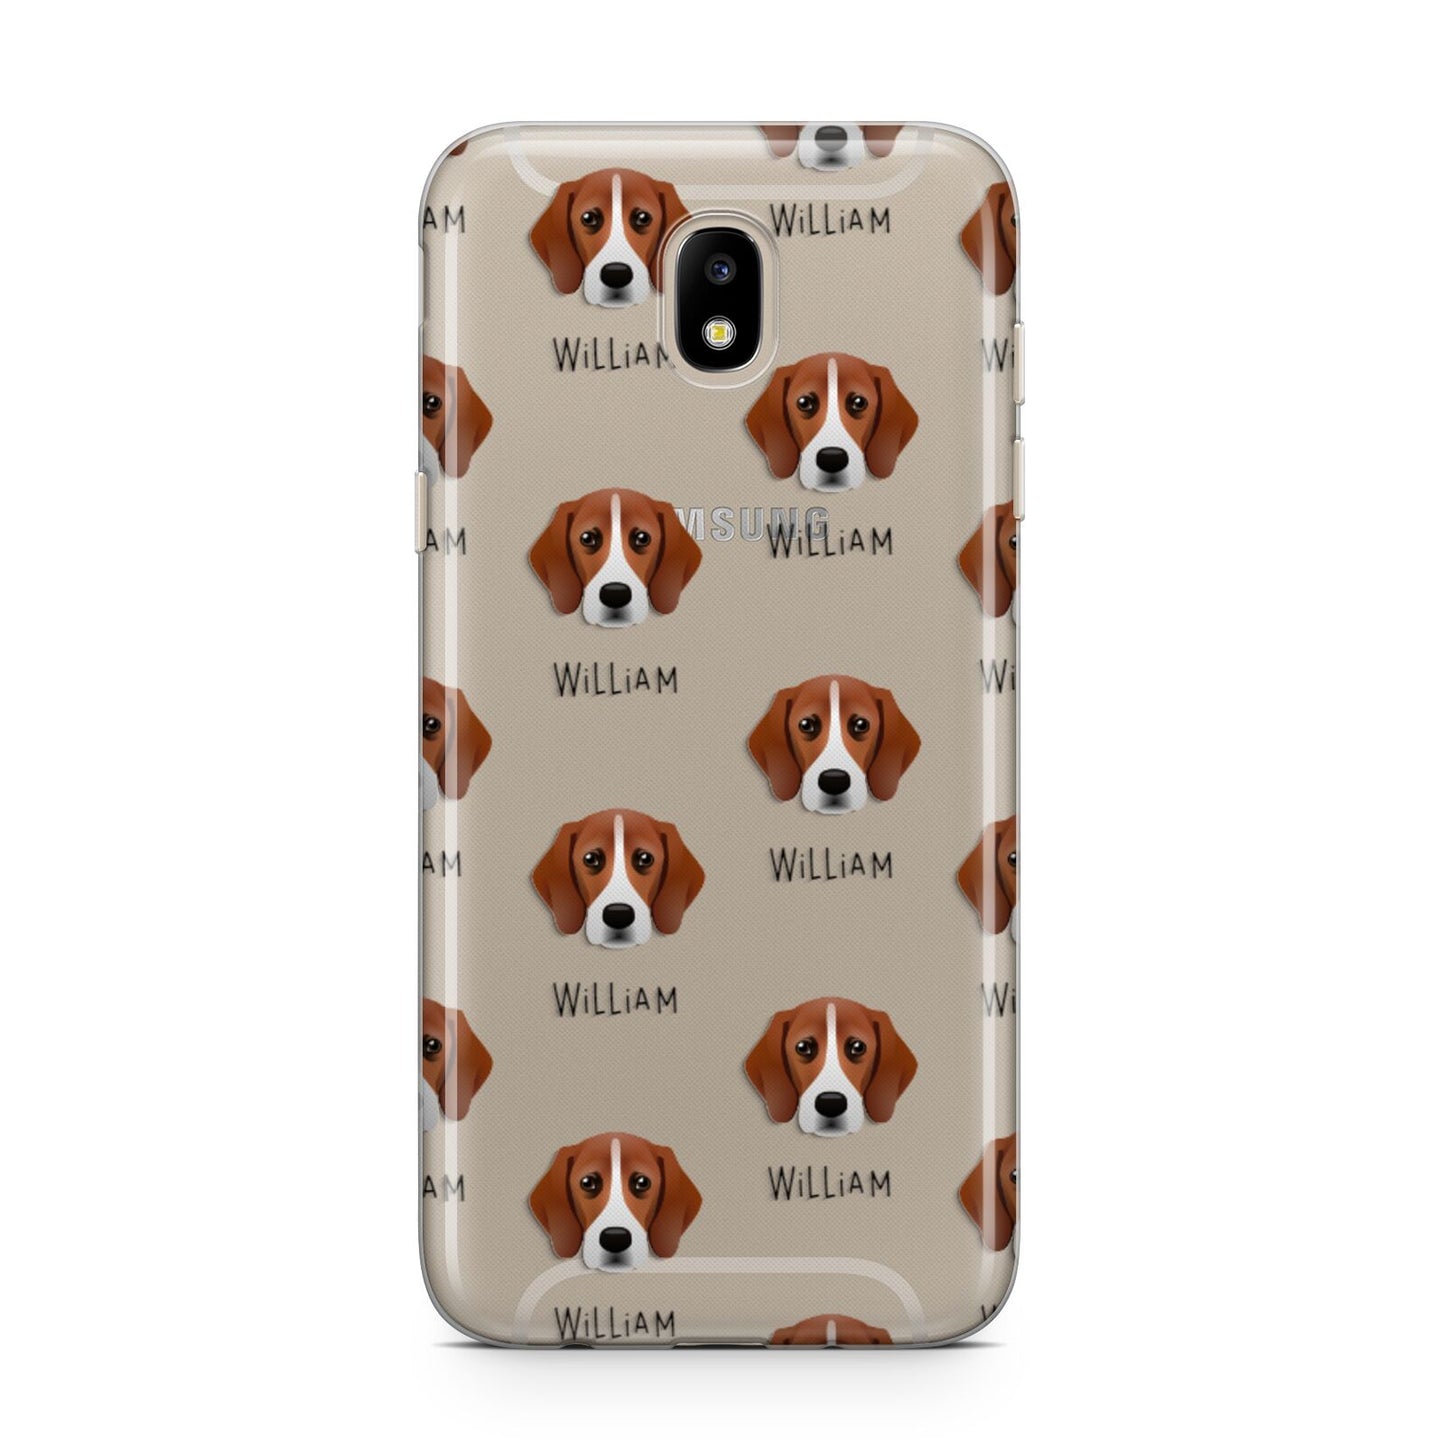 Bassugg Icon with Name Samsung J5 2017 Case